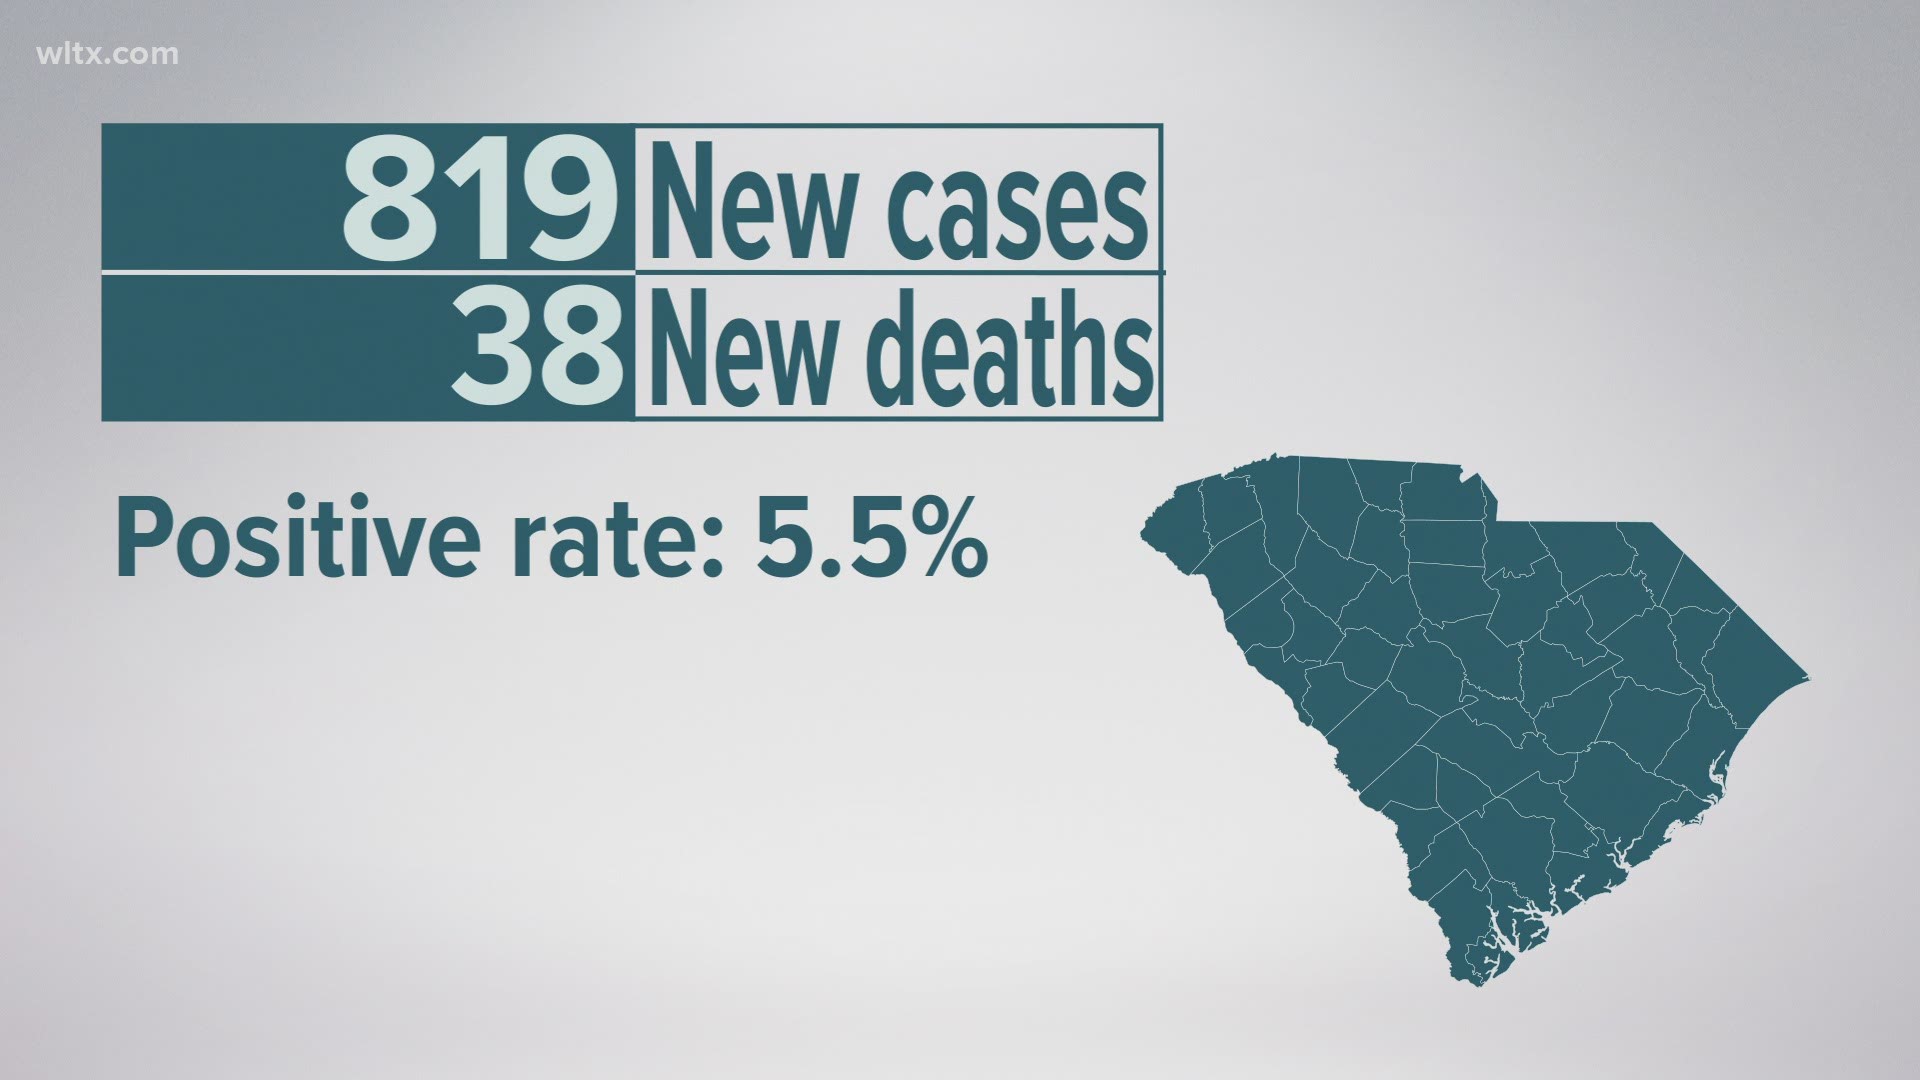 DHEC data for South Carolina rises slightly over day before.